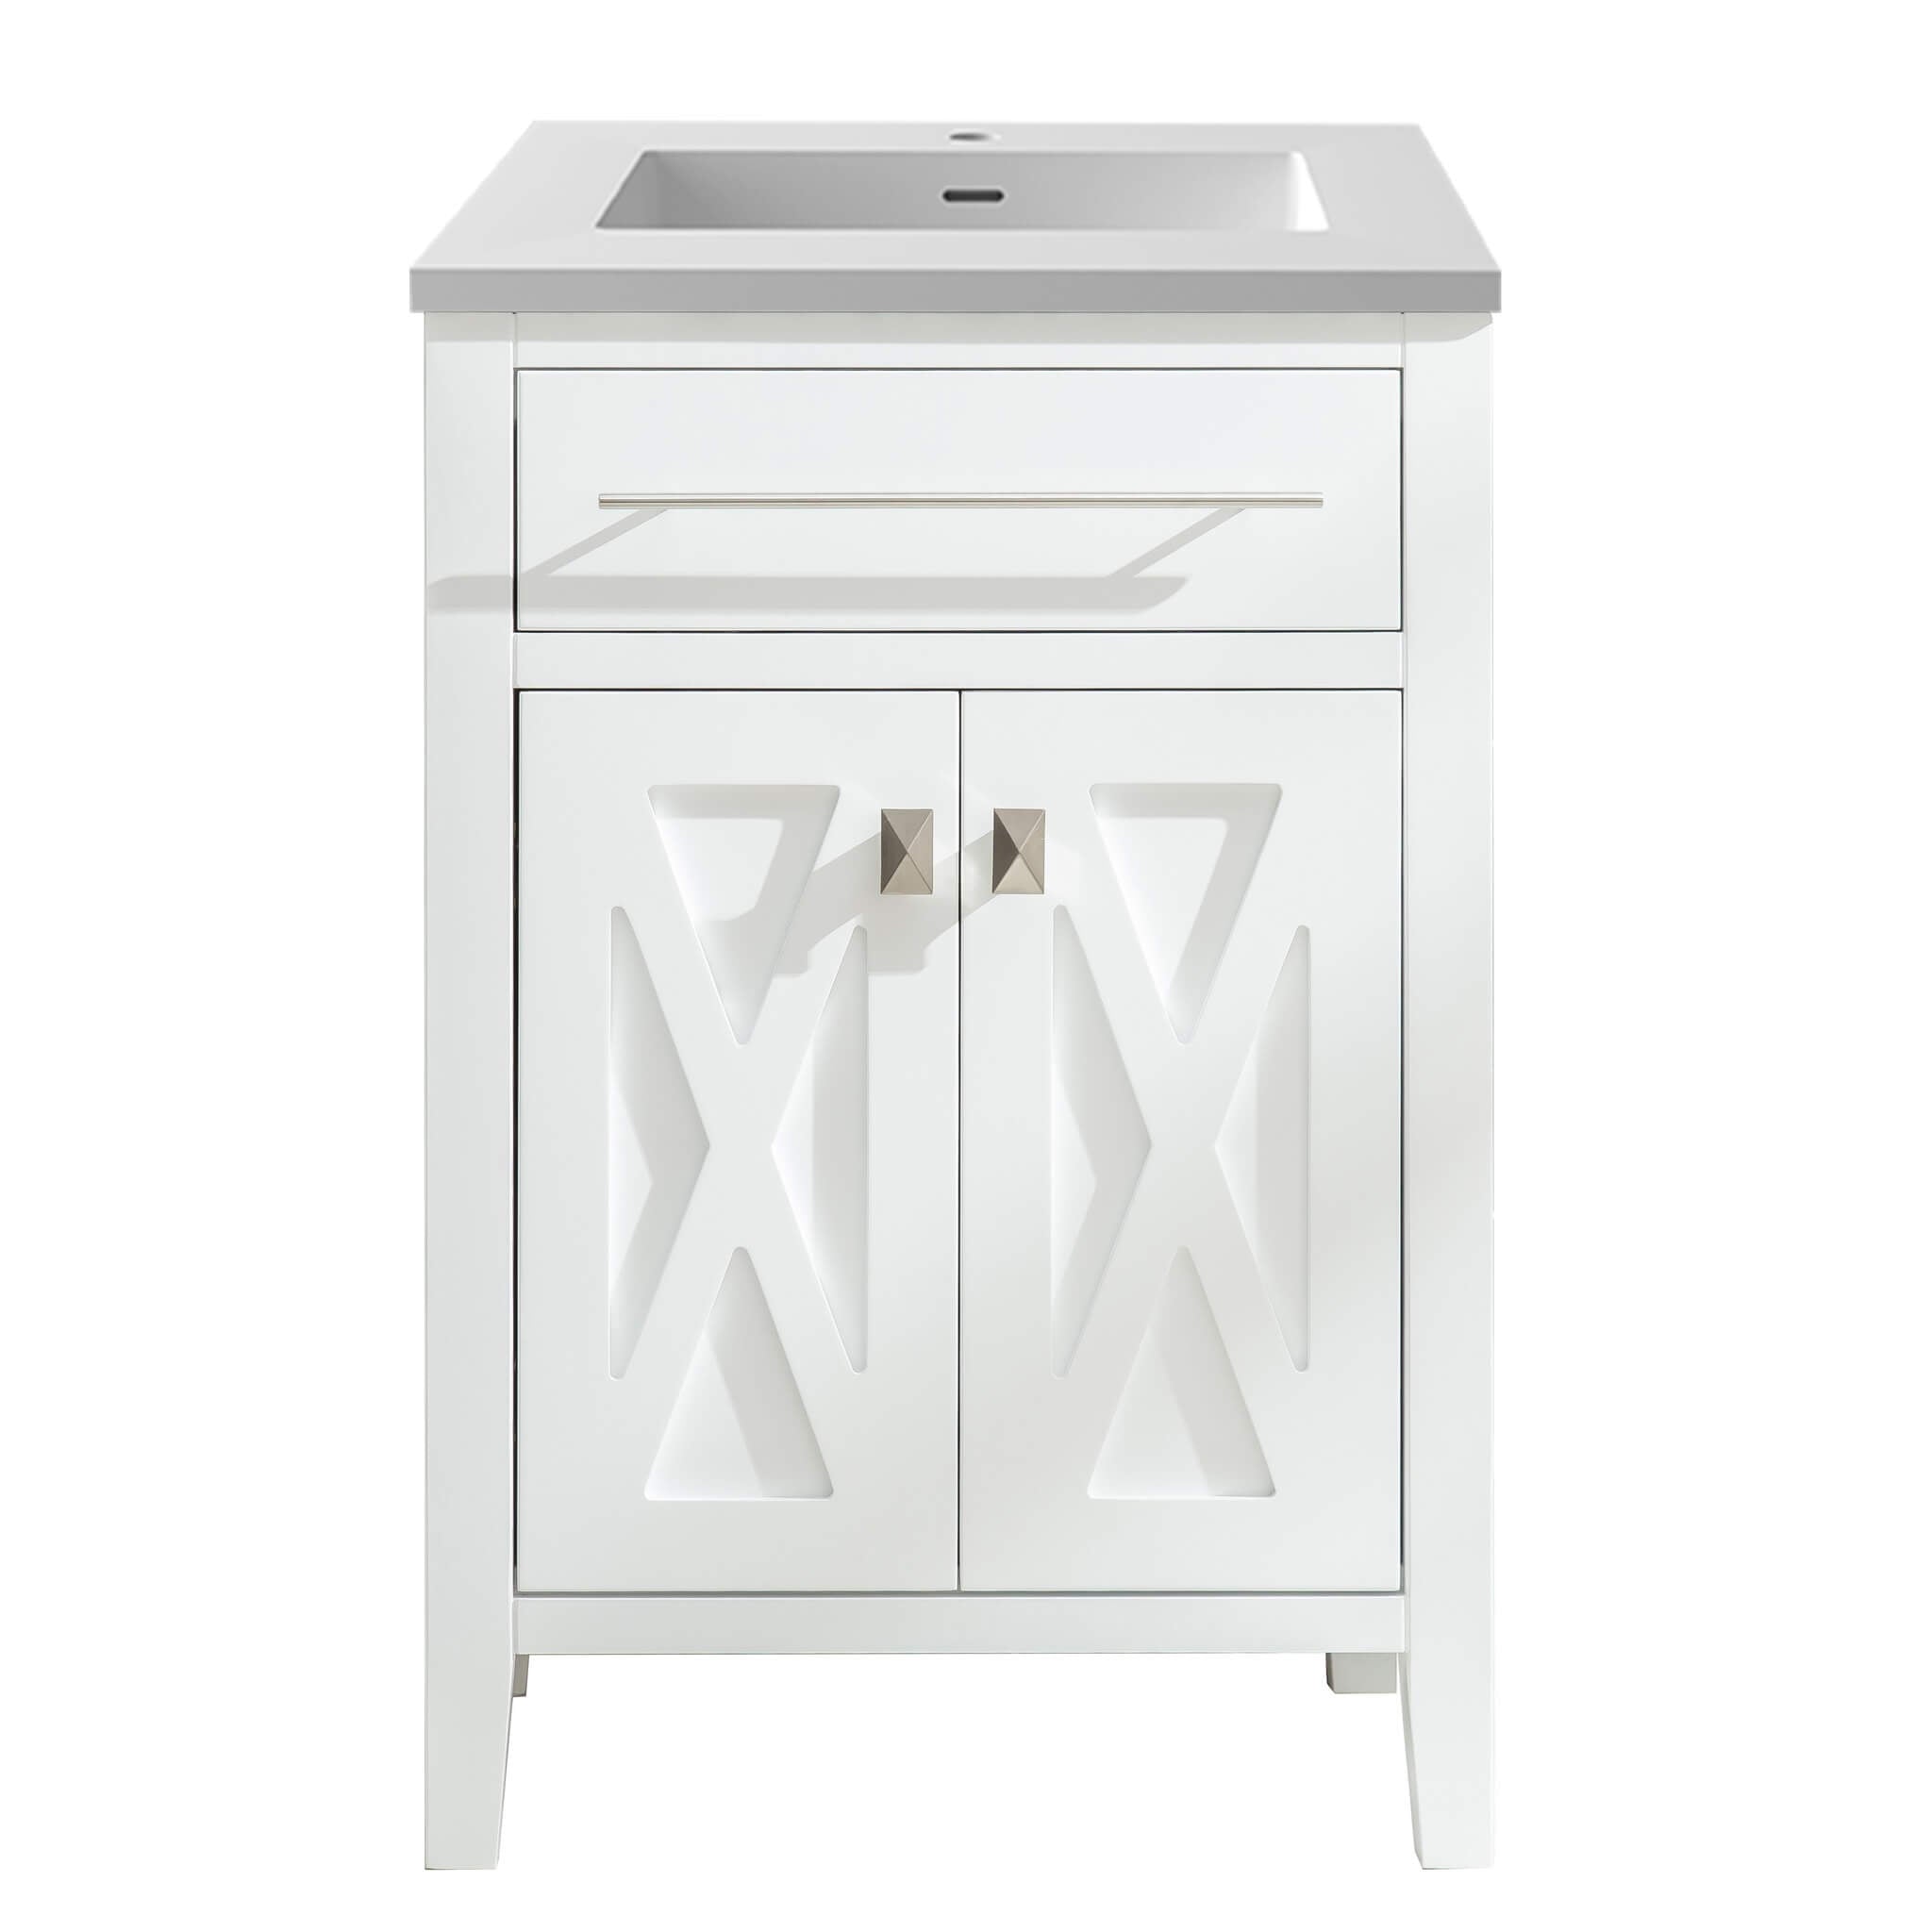 LAVIVA Wimbledon 313YG319-24W-MW 24" Single Bathroom Vanity in White with Matte White VIVA Stone Surface, Integrated Sink, Front View